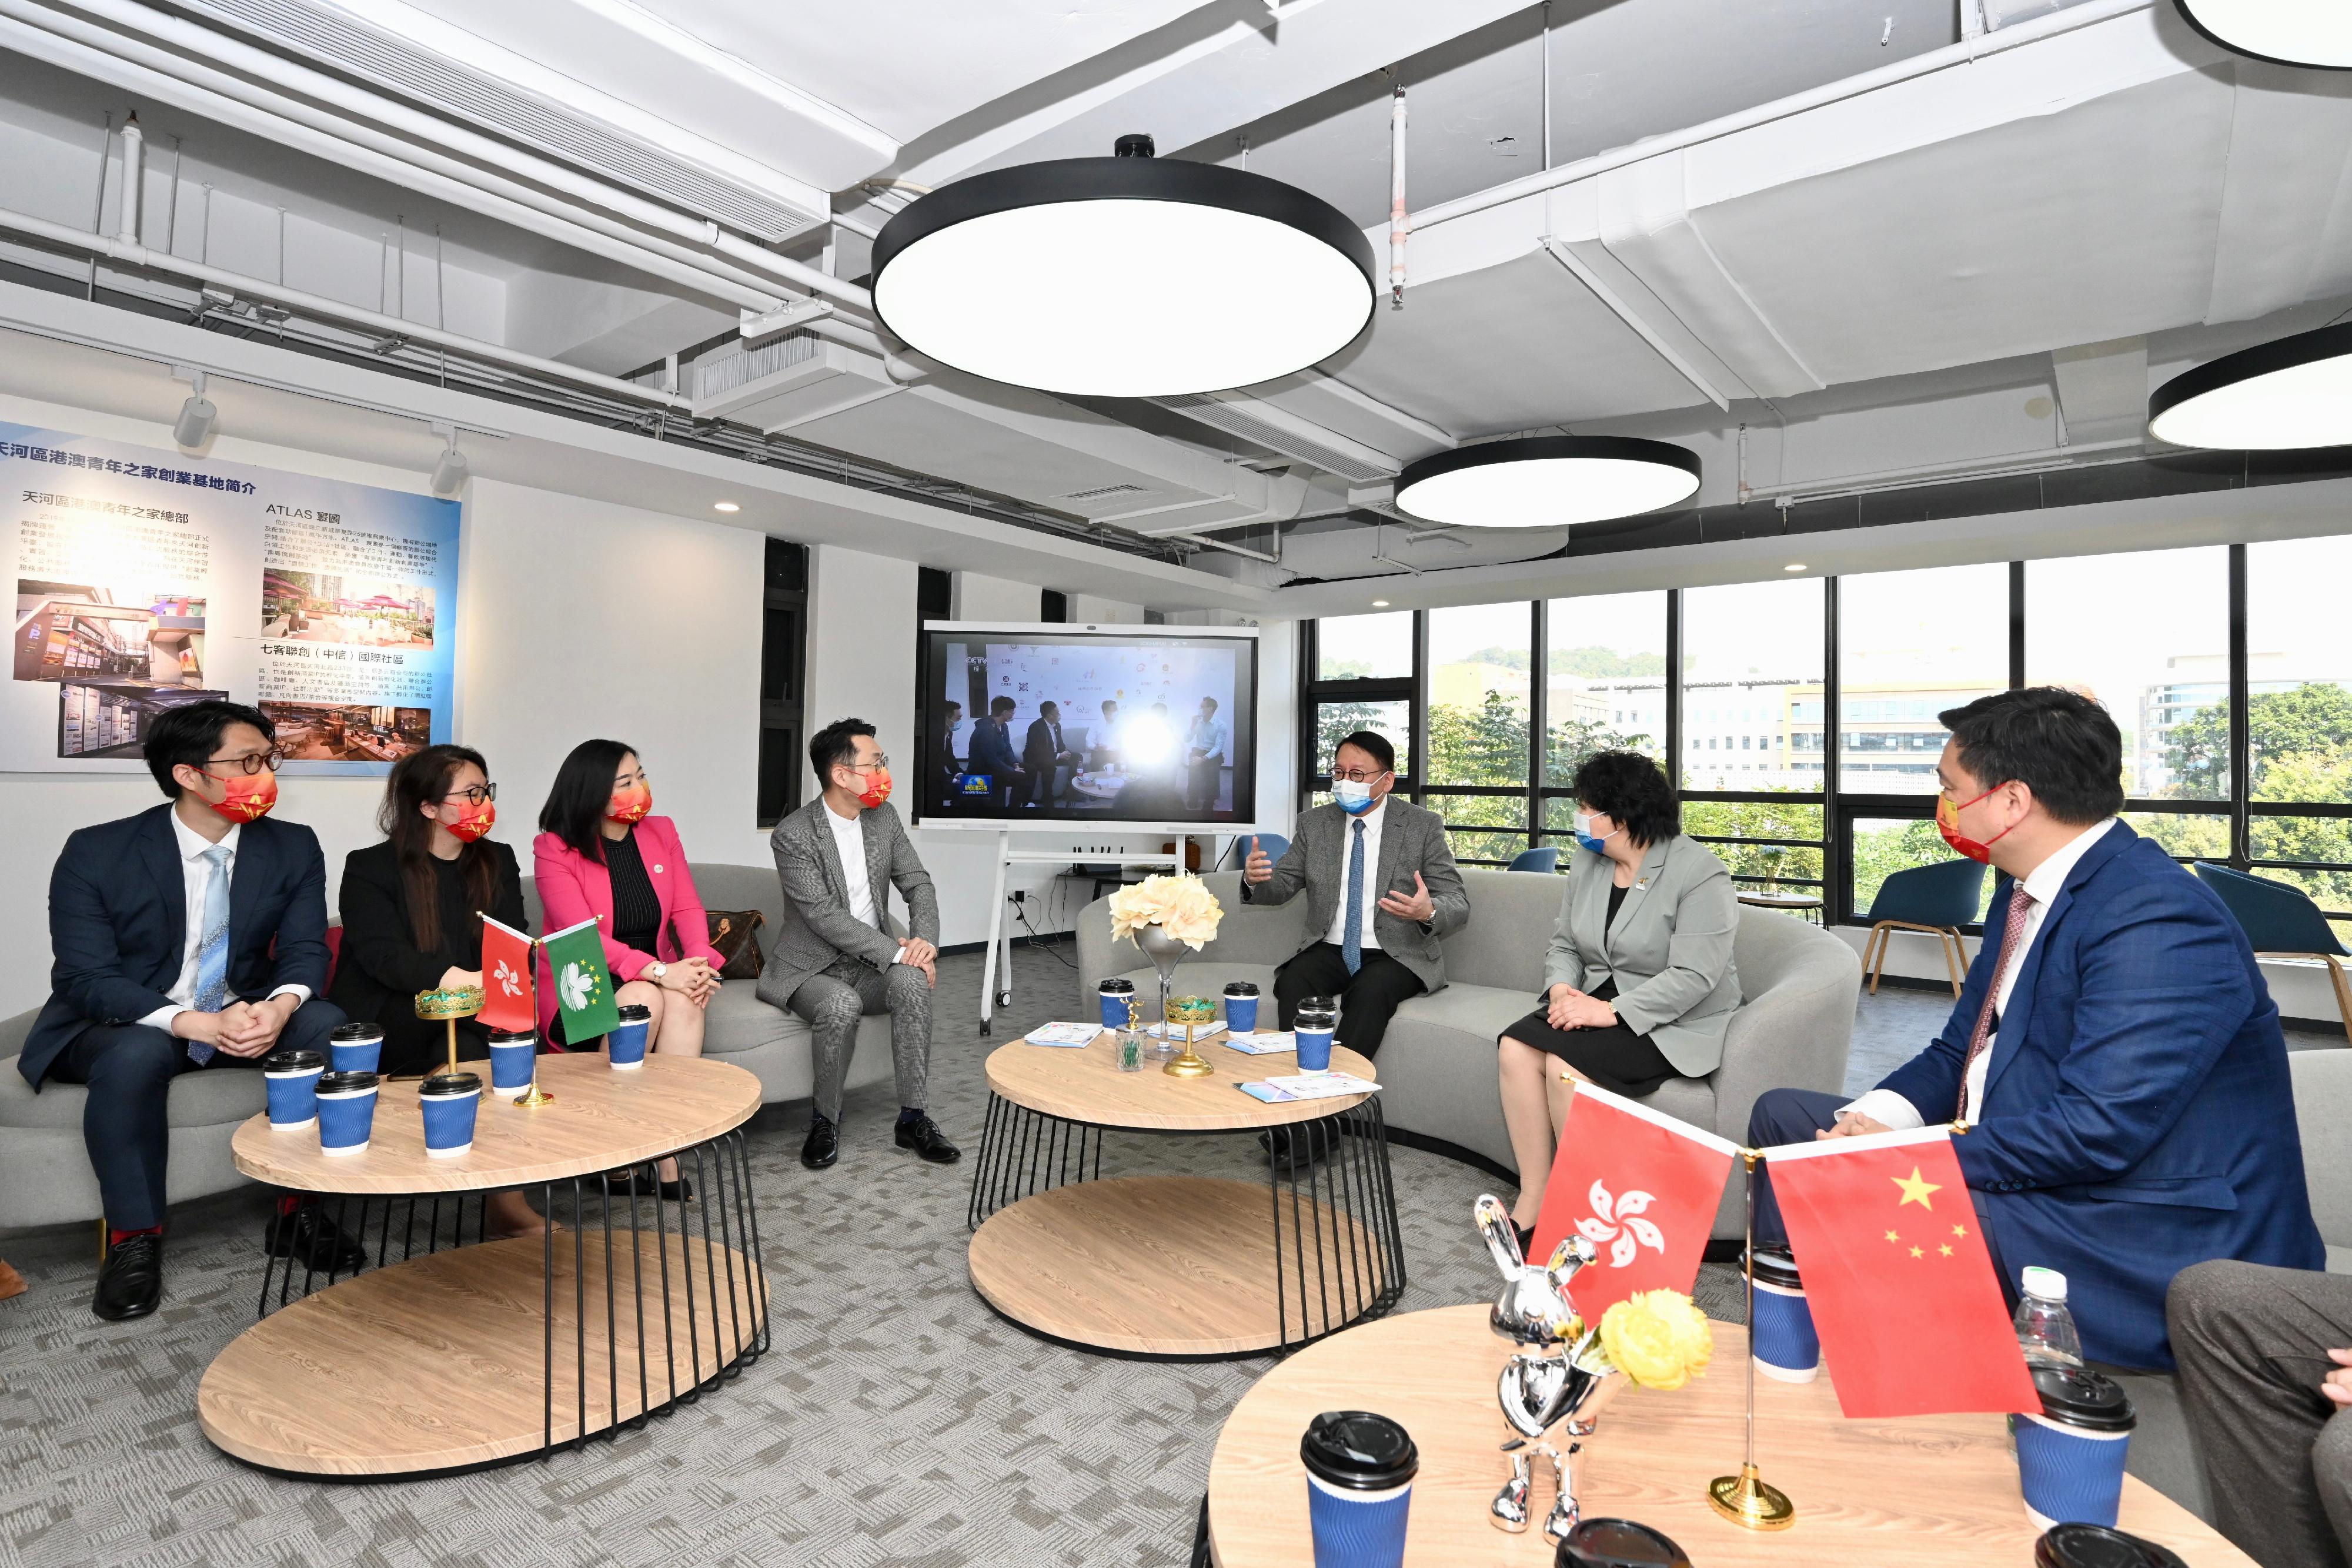 The Chief Secretary for Administration, Mr Chan Kwok-ki (third right), visited the Guangdong-Hong Kong-Macao Greater Bay Area (Guangdong) Innovation and Entrepreneurship Incubation Base in Guangzhou today (February 20). He was briefed on the one-stop services on innovation and entrepreneurship provided by the base to young people from Hong Kong and Macao, and exchanged views with representatives of a service organisation stationed in the base and some Hong Kong young entrepreneurs.